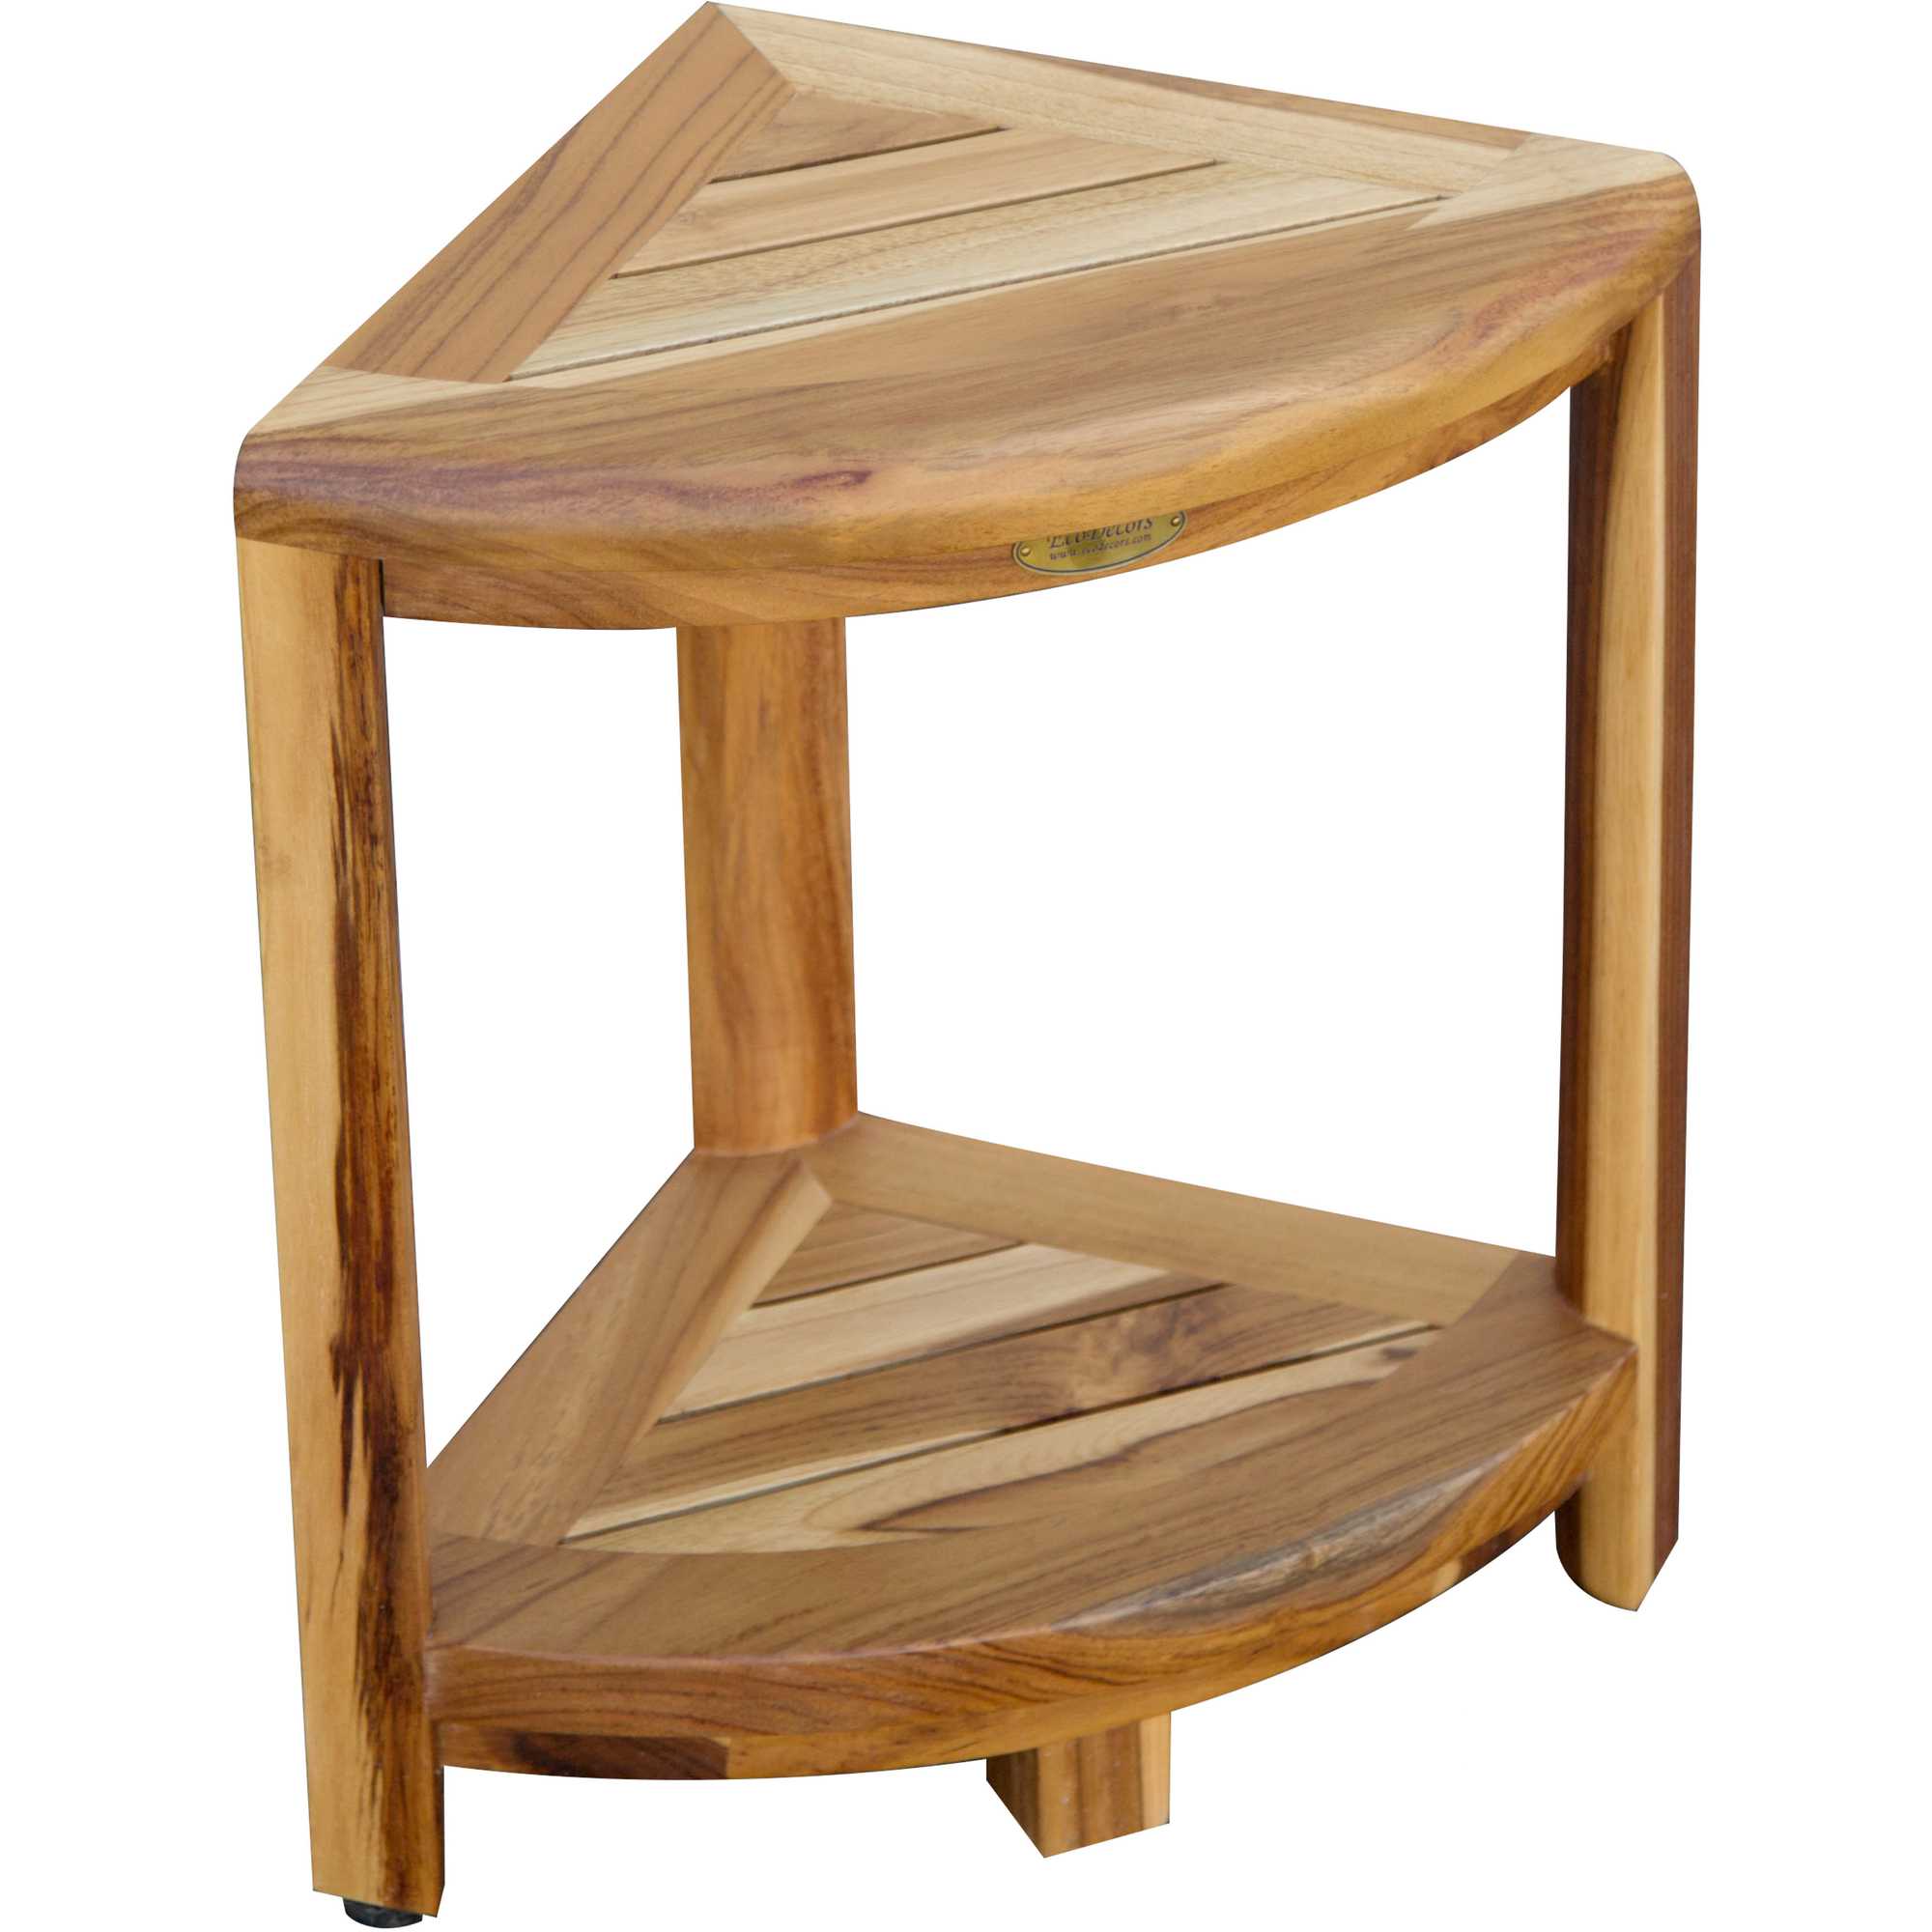 Compact Teak Corner Shower Stool with Shelf in Natural Finish